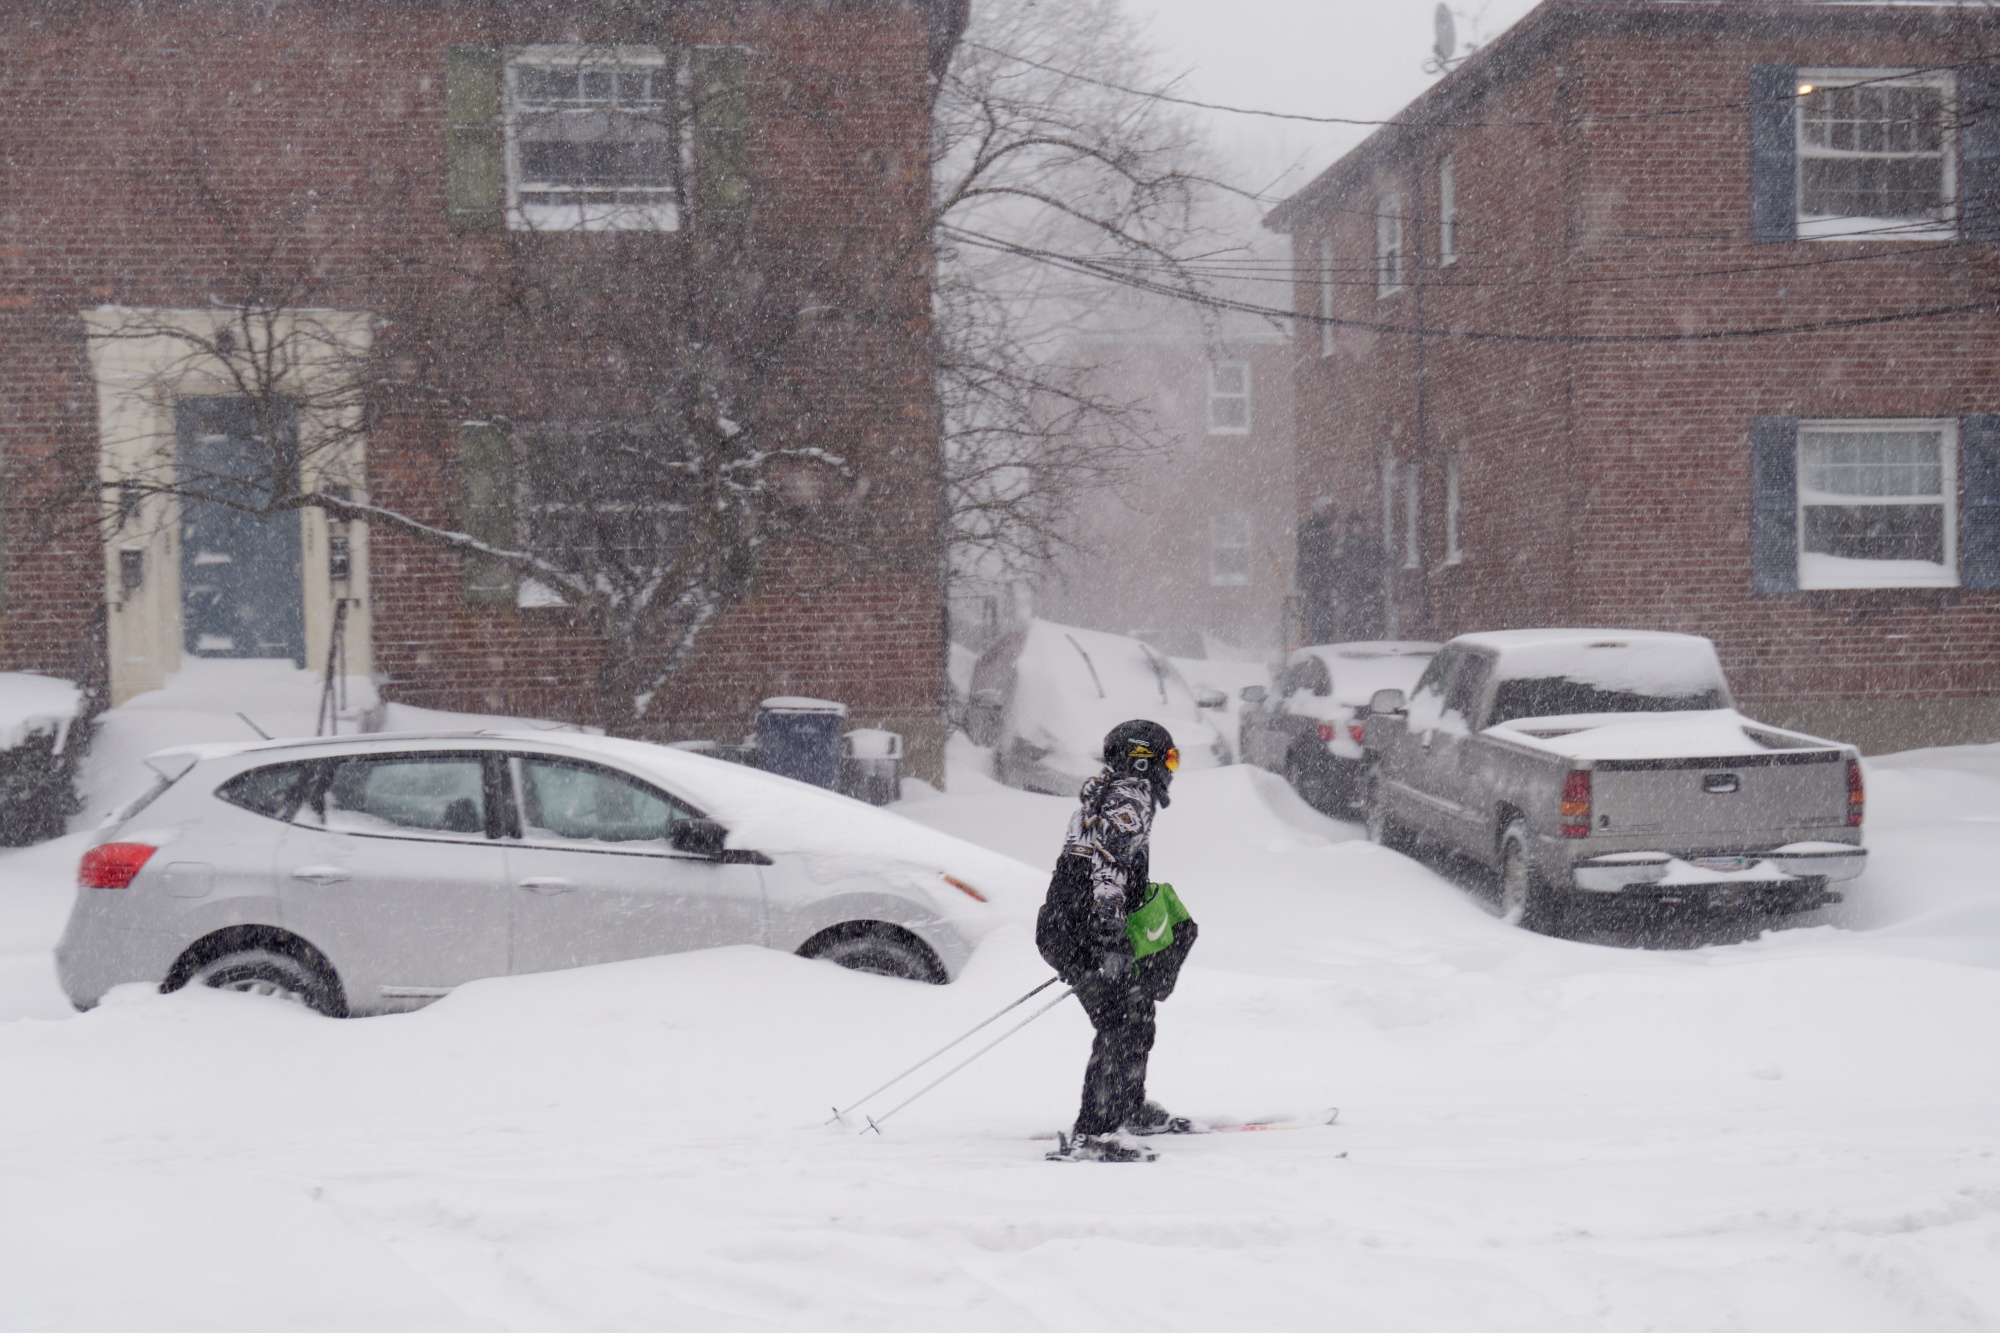 A resident skis down a street during a blizzard in Boston, on Jan. 29.&nbsp;